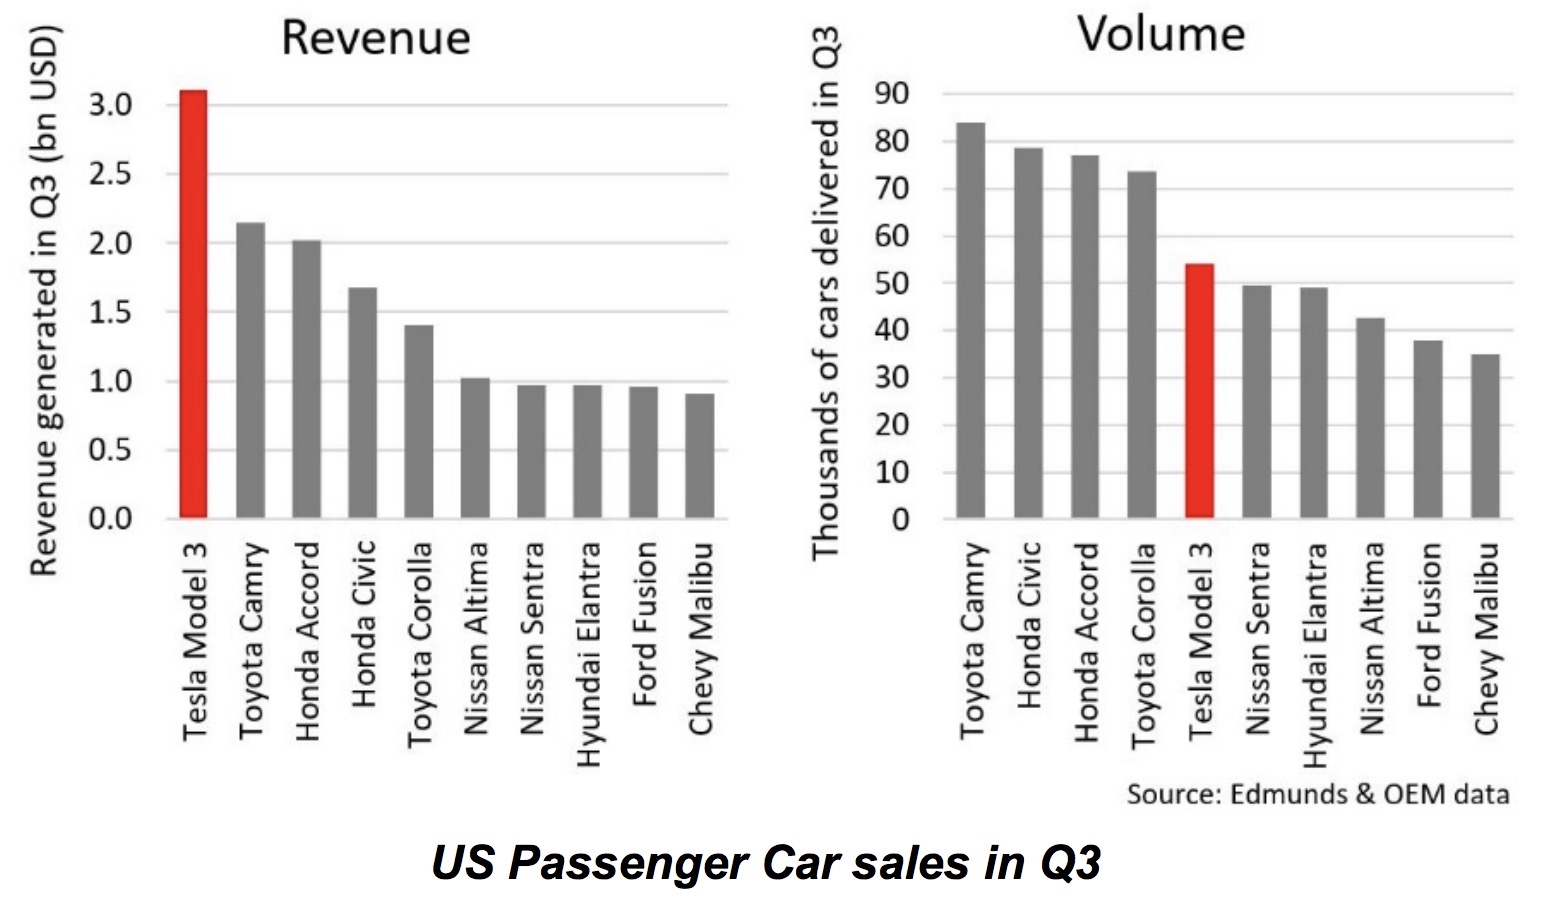 Tesla Model 3 bestselling US car by revenue and delivers gross